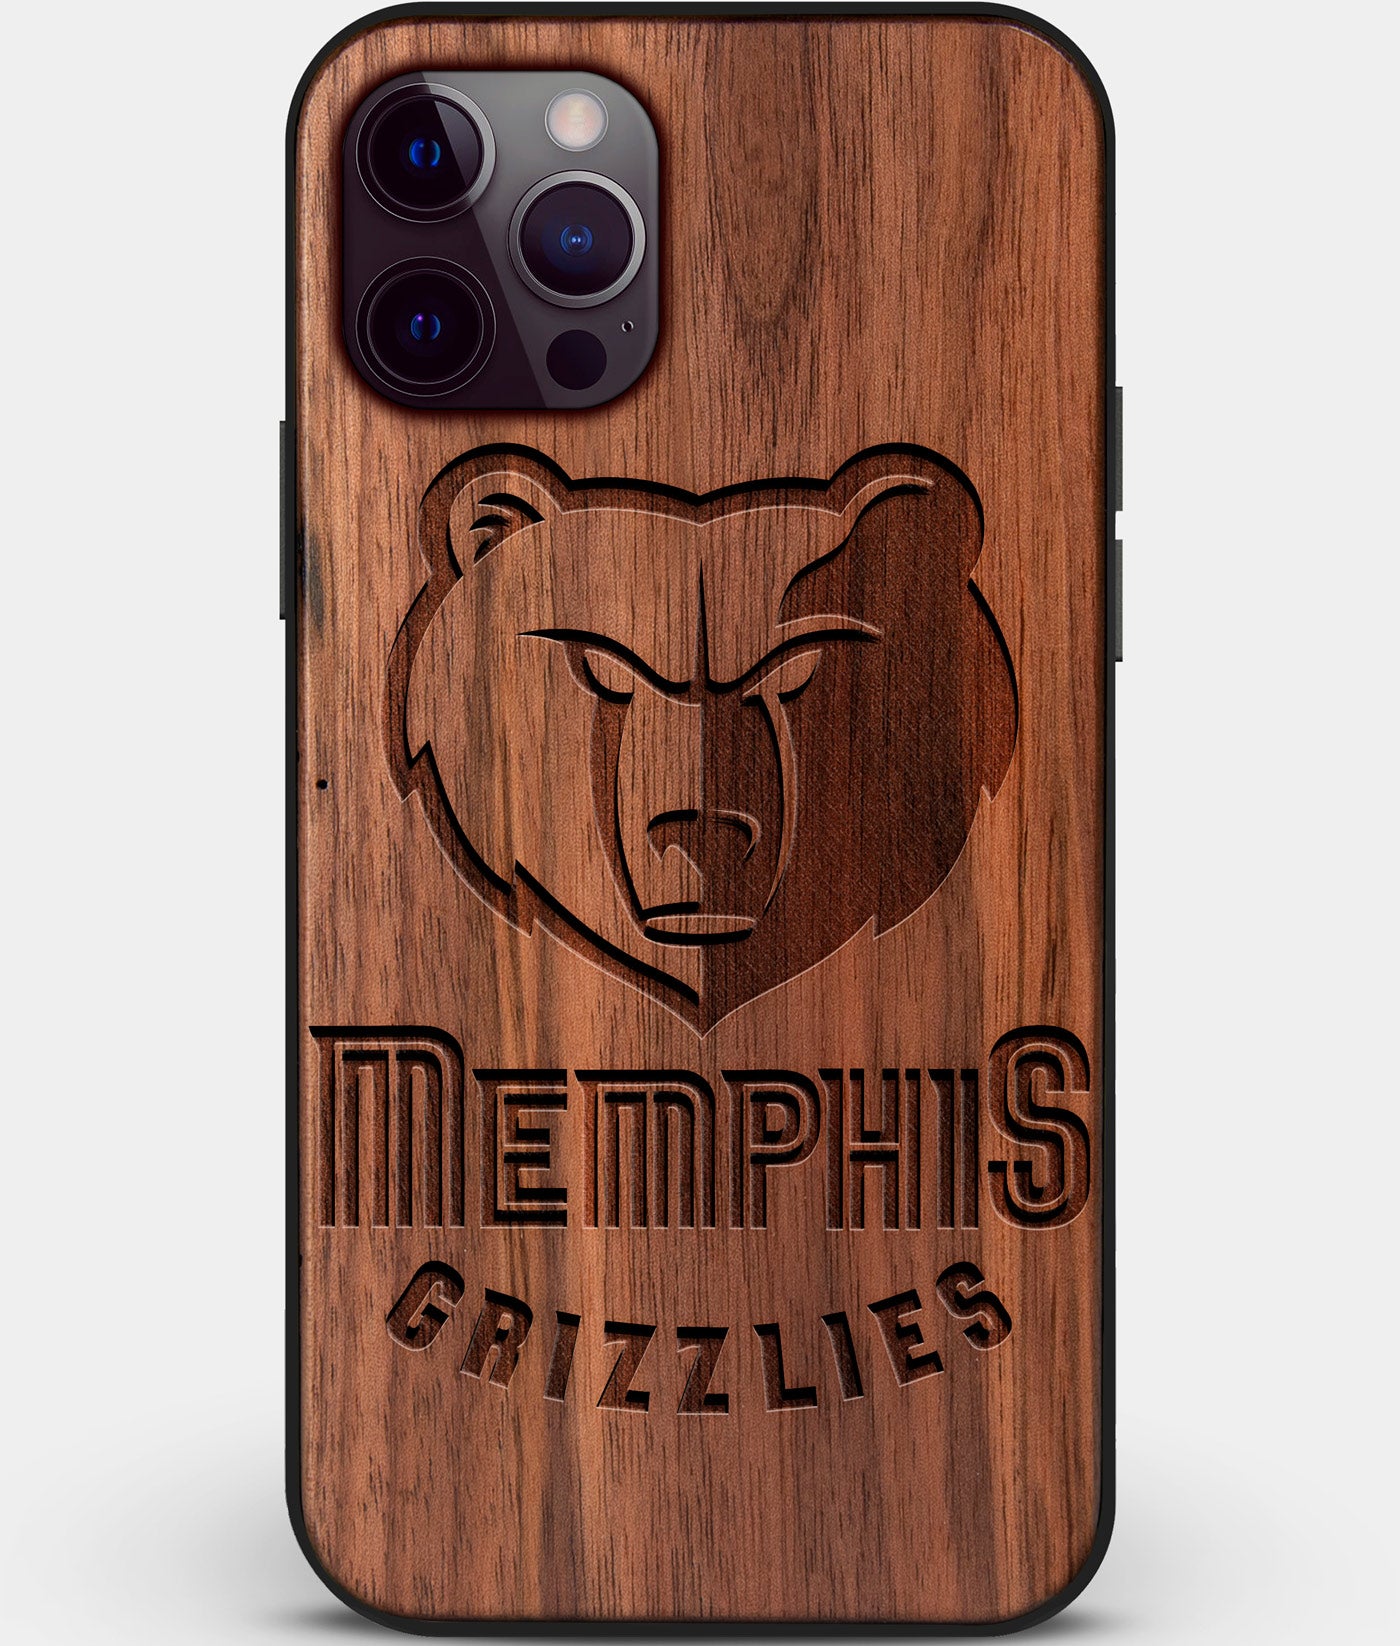 Custom Carved Wood Memphis Grizzlies iPhone 12 Pro Max Case | Personalized Walnut Wood Memphis Grizzlies Cover, Birthday Gift, Gifts For Him, Monogrammed Gift For Fan | by Engraved In Nature